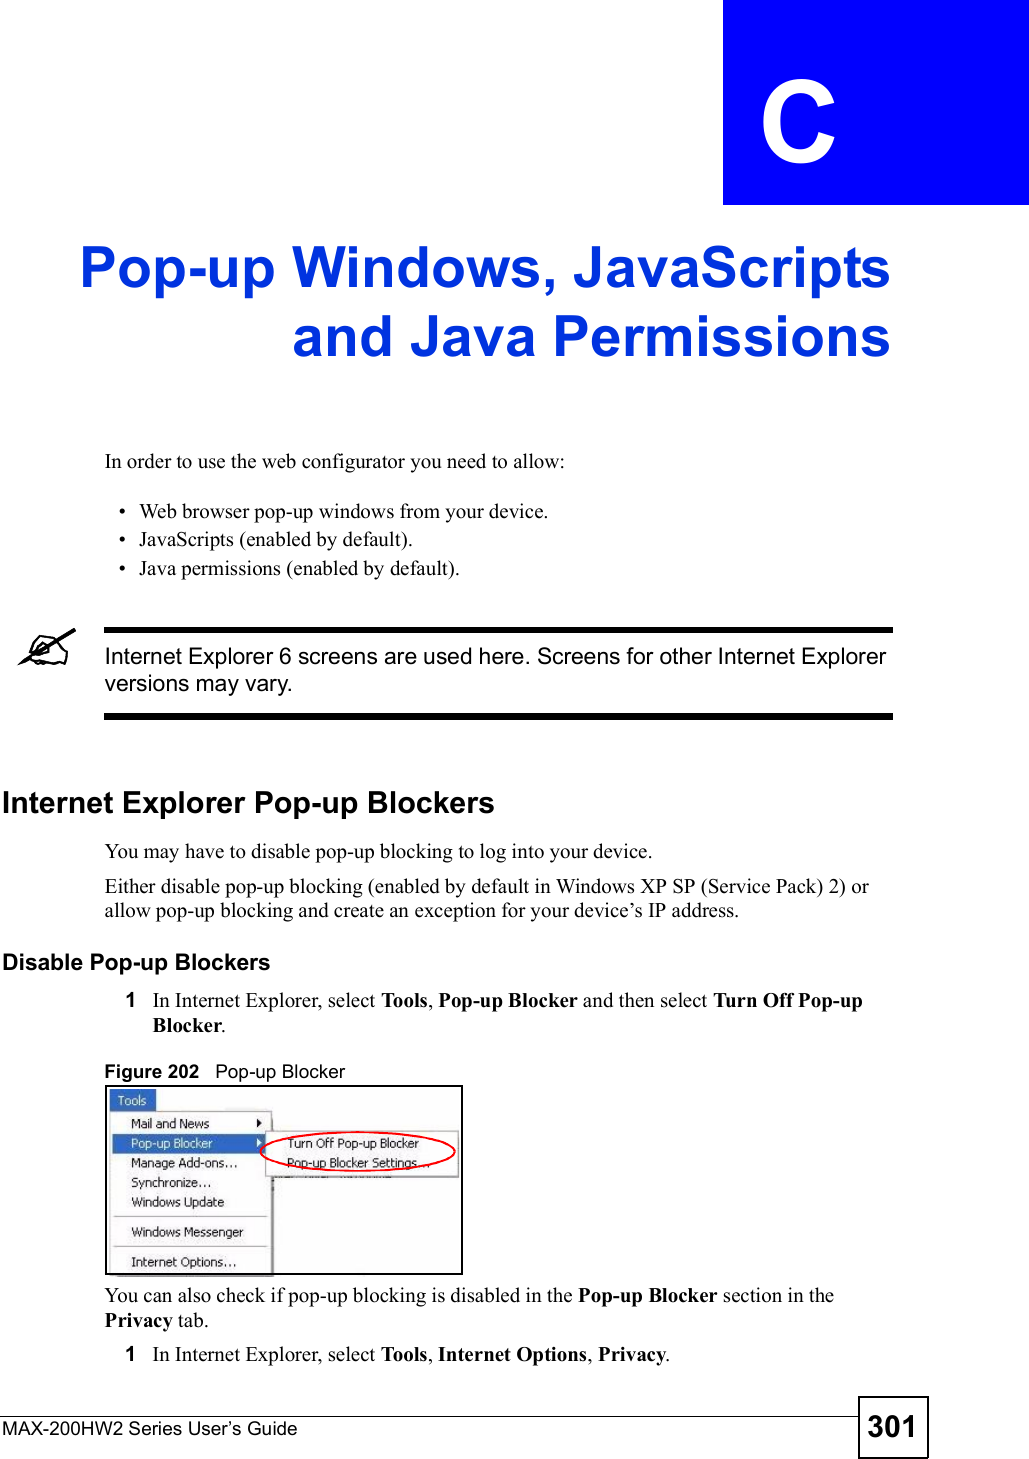 MAX-200HW2 Series User s Guide 301APPENDIX  C Pop-up Windows, JavaScriptsand Java PermissionsIn order to use the web configurator you need to allow: Web browser pop-up windows from your device. JavaScripts (enabled by default). Java permissions (enabled by default).Internet Explorer 6 screens are used here. Screens for other Internet Explorer versions may vary.Internet Explorer Pop-up BlockersYou may have to disable pop-up blocking to log into your device. Either disable pop-up blocking (enabled by default in Windows XP SP (Service Pack) 2) or allow pop-up blocking and create an exception for your device!s IP address.Disable Pop-up Blockers1In Internet Explorer, select Tools,Pop-up Blocker and then select Turn Off Pop-up Blocker.Figure 202   Pop-up BlockerYou can also check if pop-up blocking is disabled in the Pop-up Blocker section in the Privacy tab. 1In Internet Explorer, select Tools,Internet Options,Privacy.